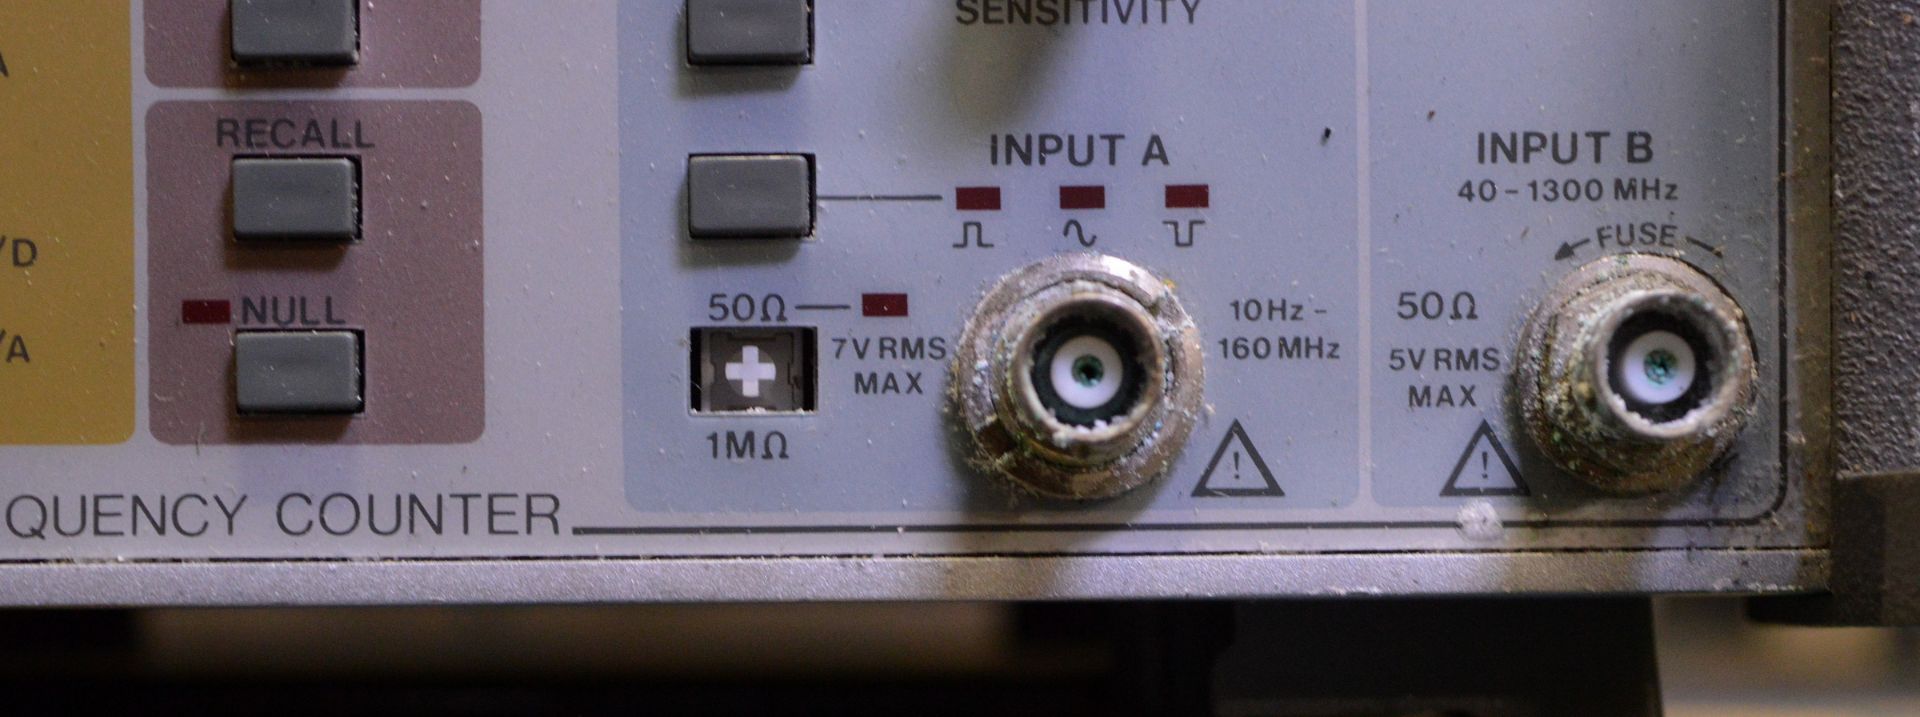 Racal-Dana 1998 Frequency Counter Unit - Image 3 of 3